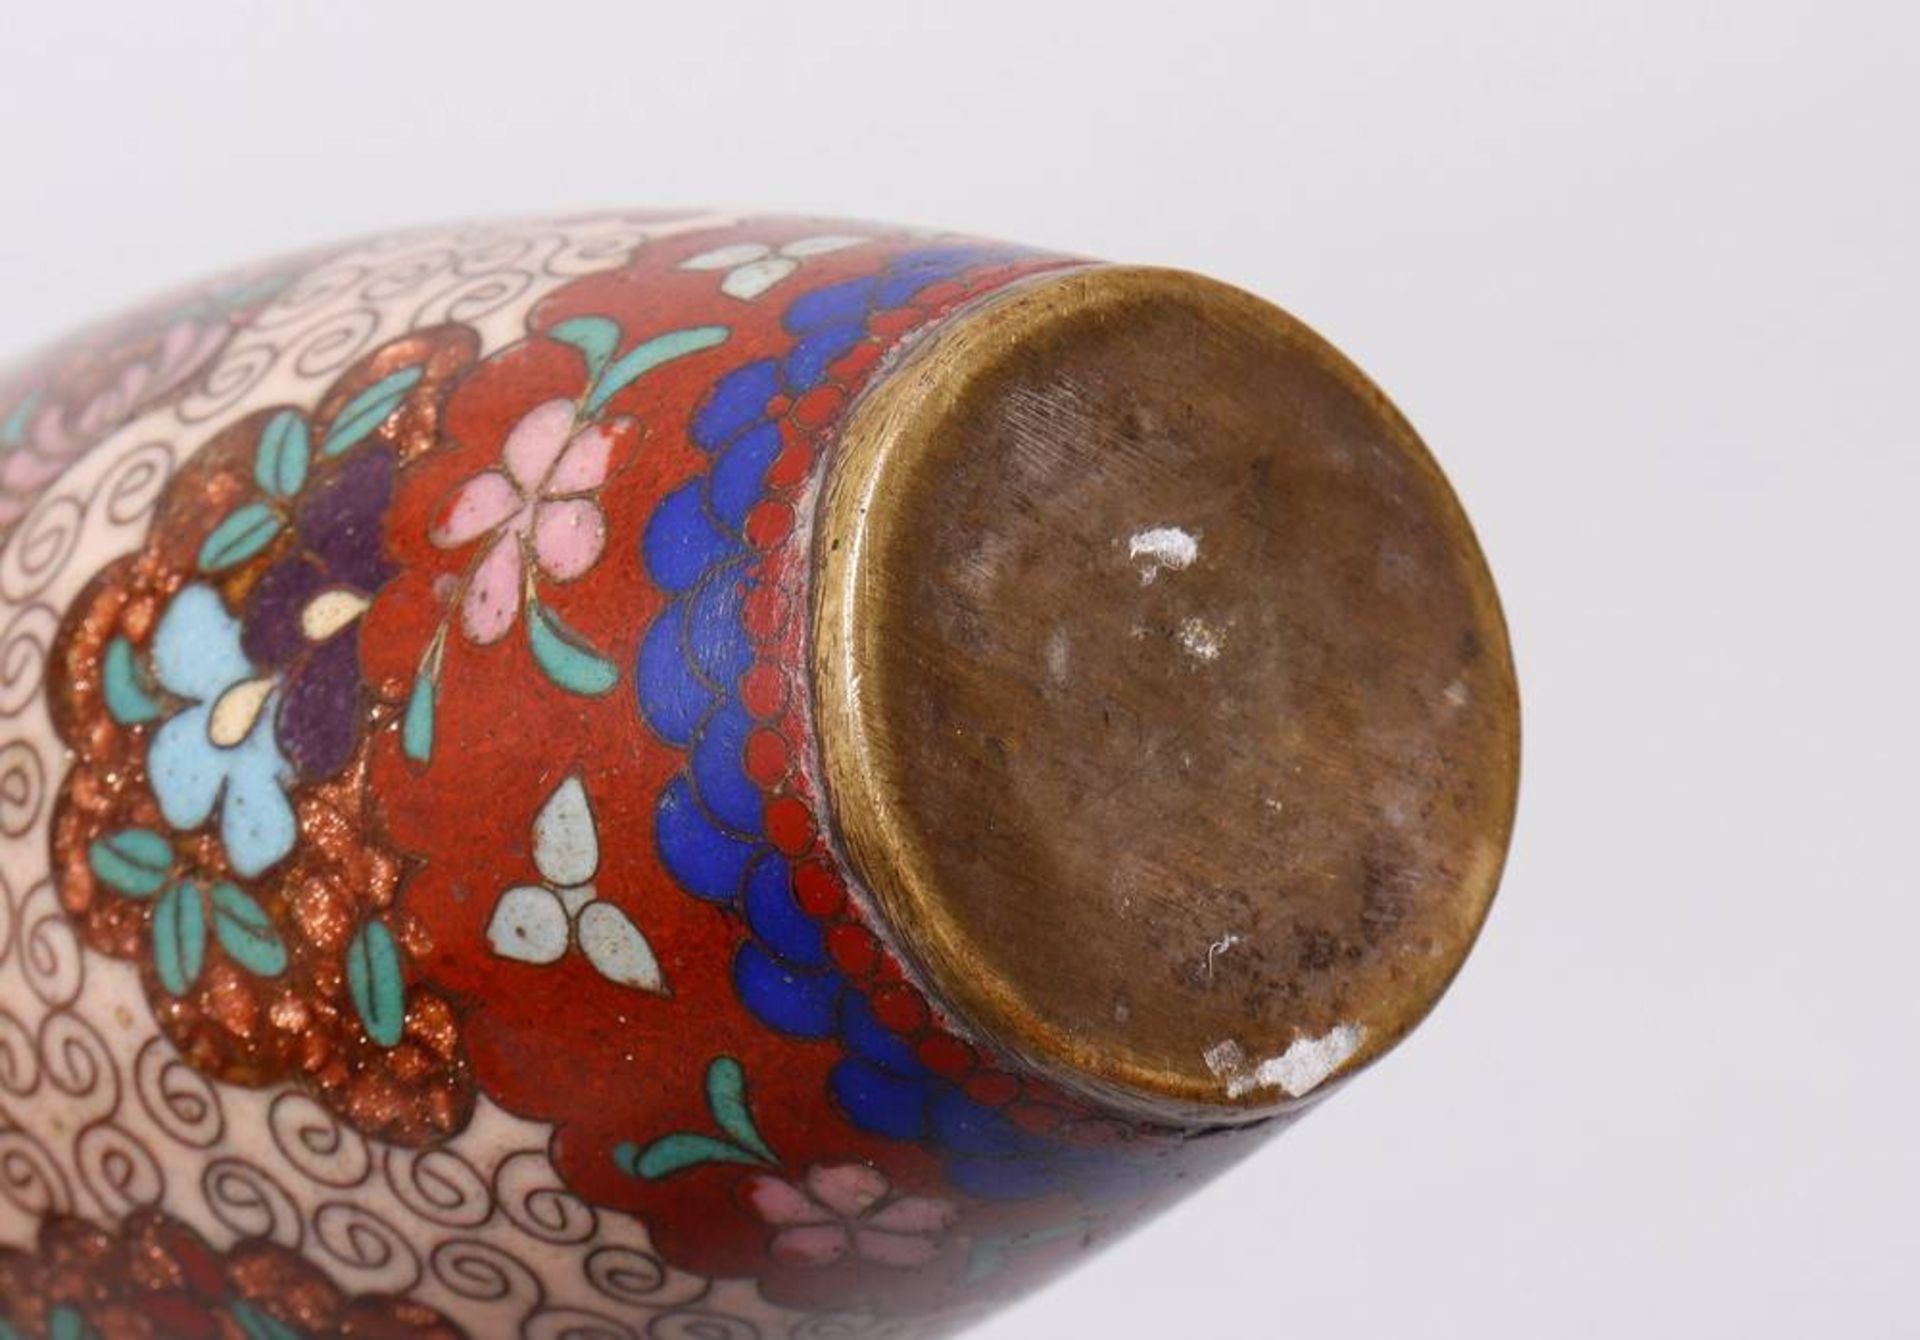 Small cloisonne vase, China, Qing period - Image 5 of 5